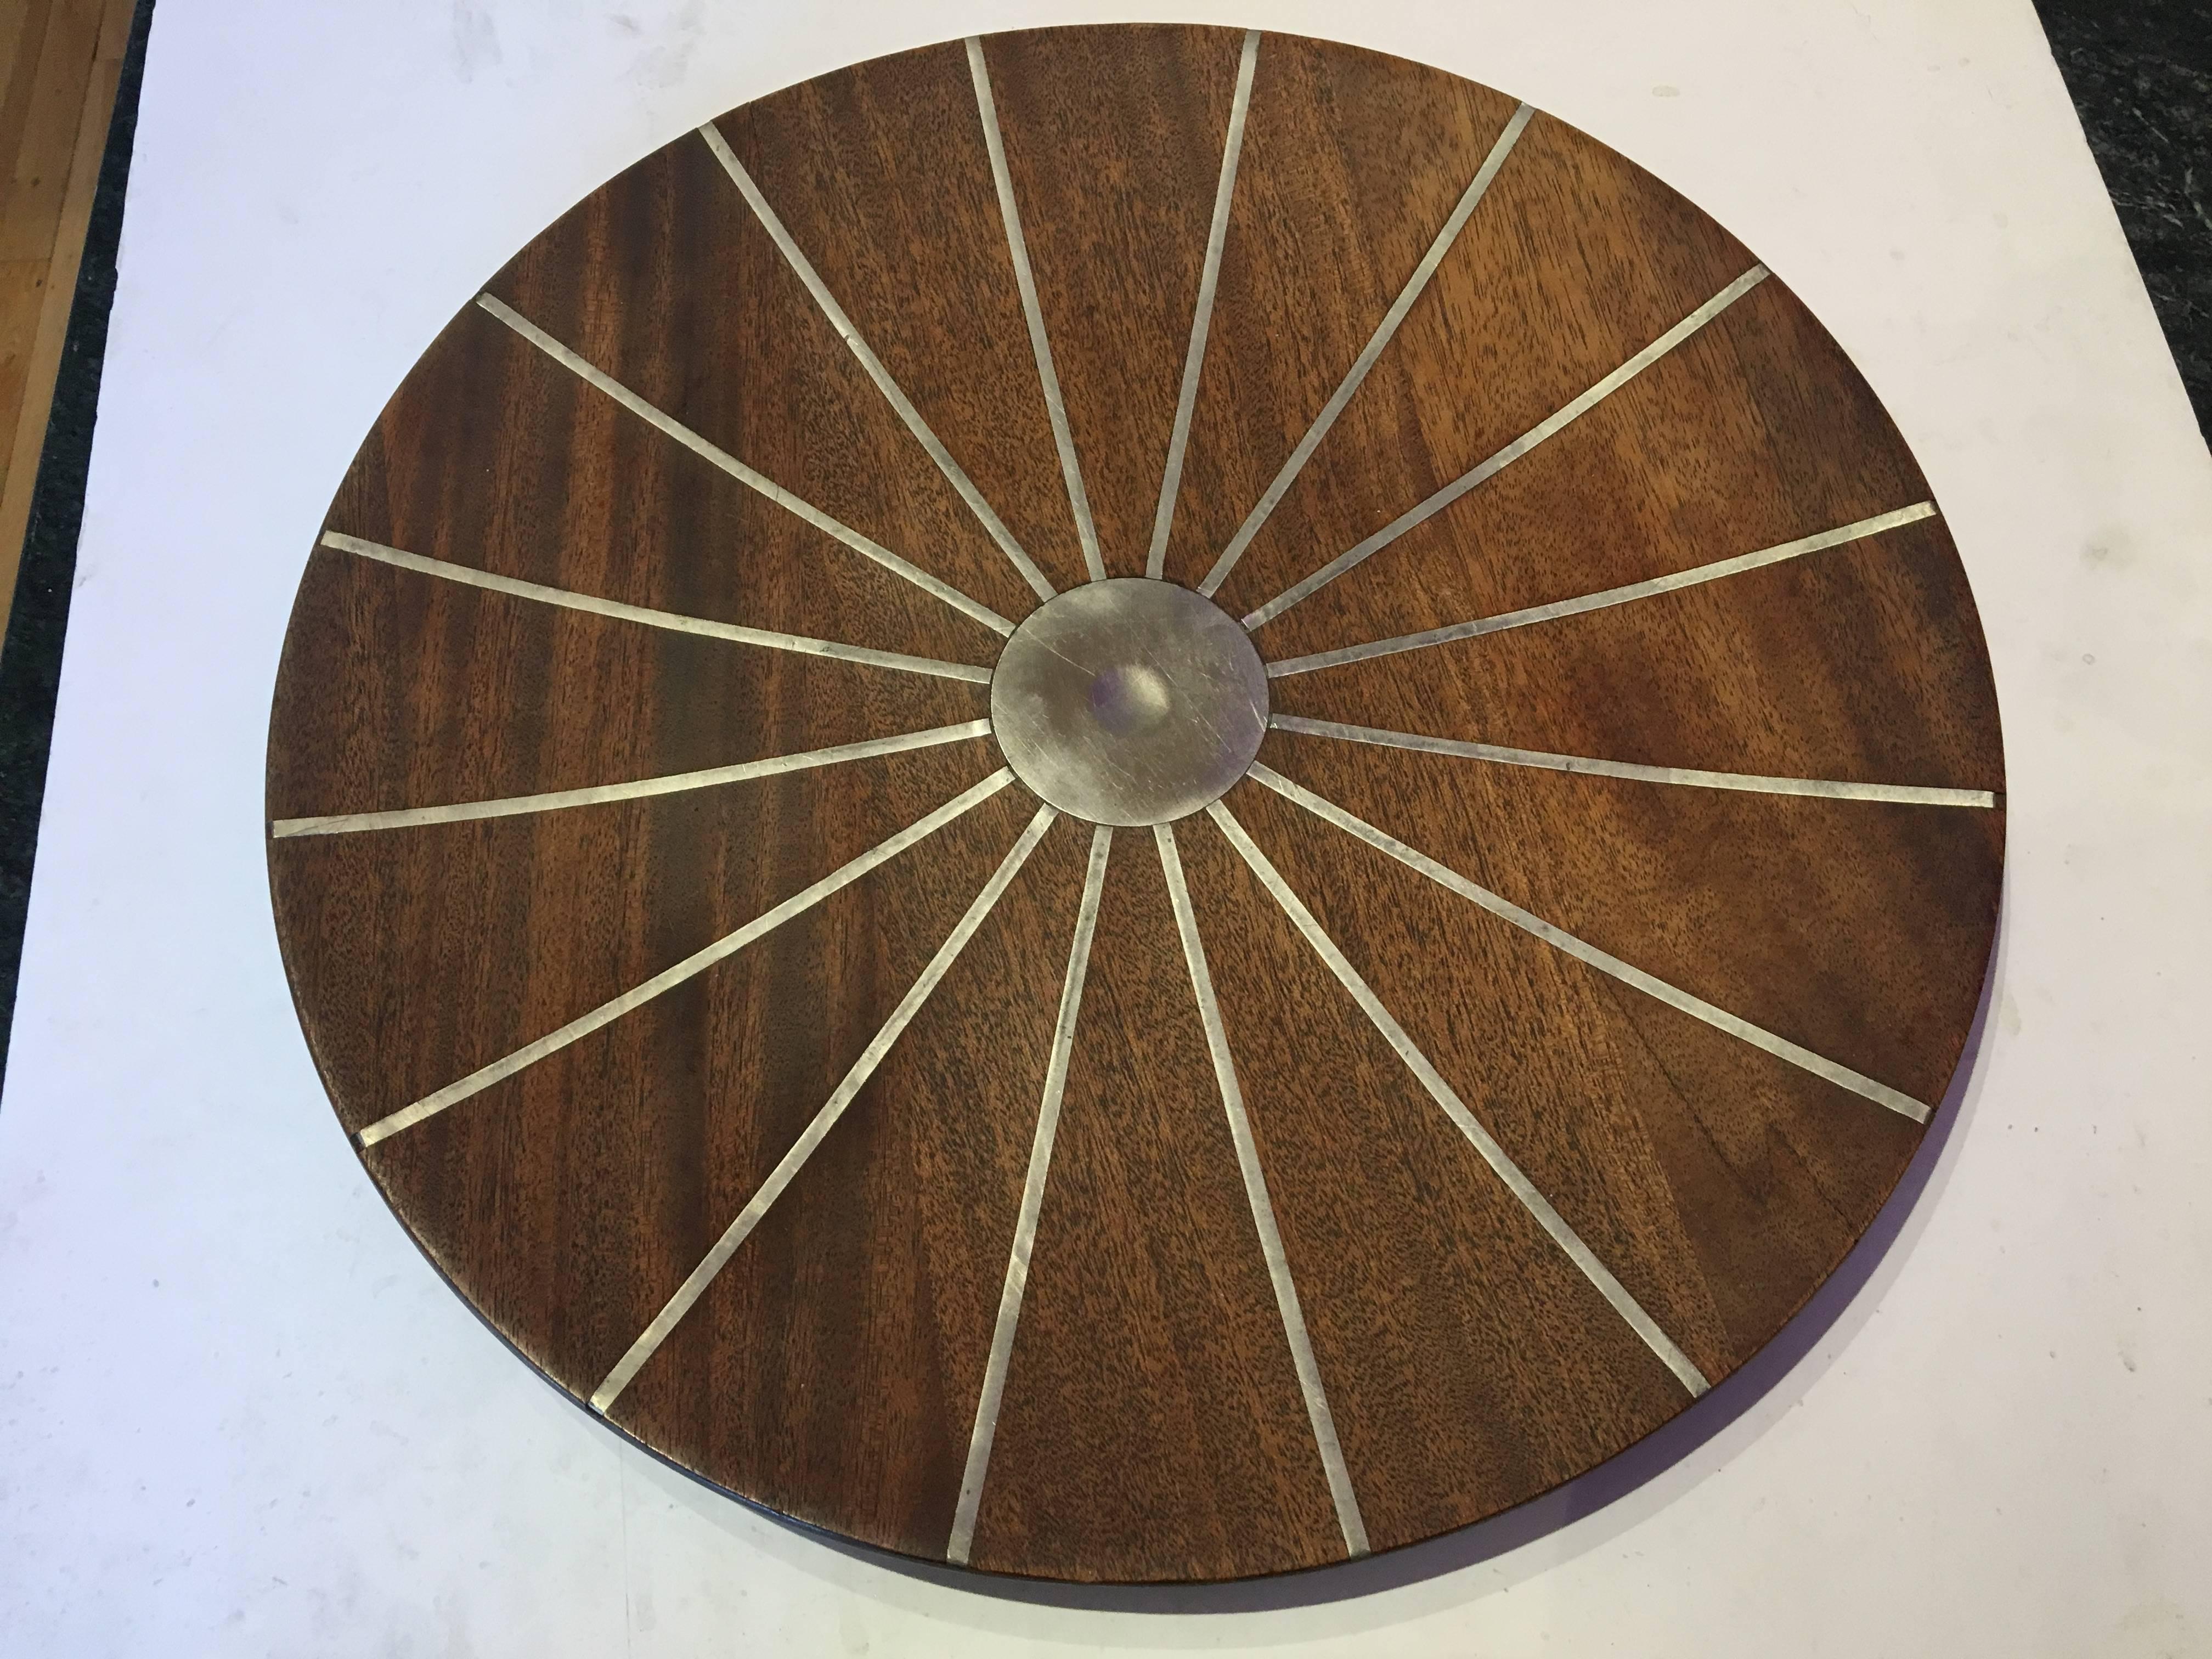 American Solid Walnut and Silver Inlaid Large Charger Plate Designed by Paul Evans